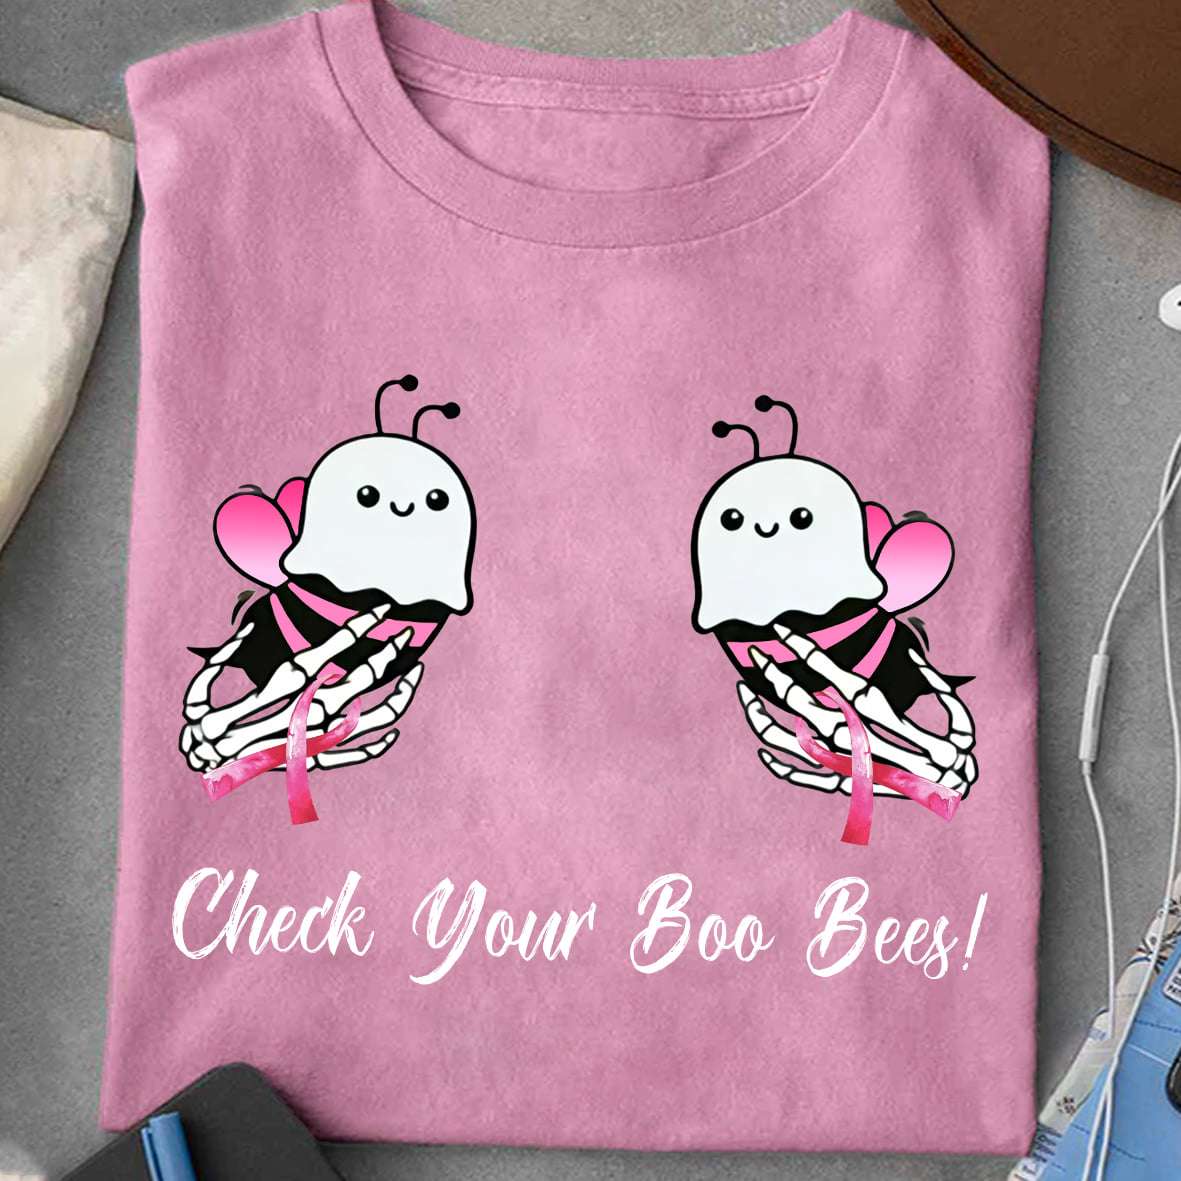 Boo Bees Breast Cancer Ribbon - Check Your Boo Bees